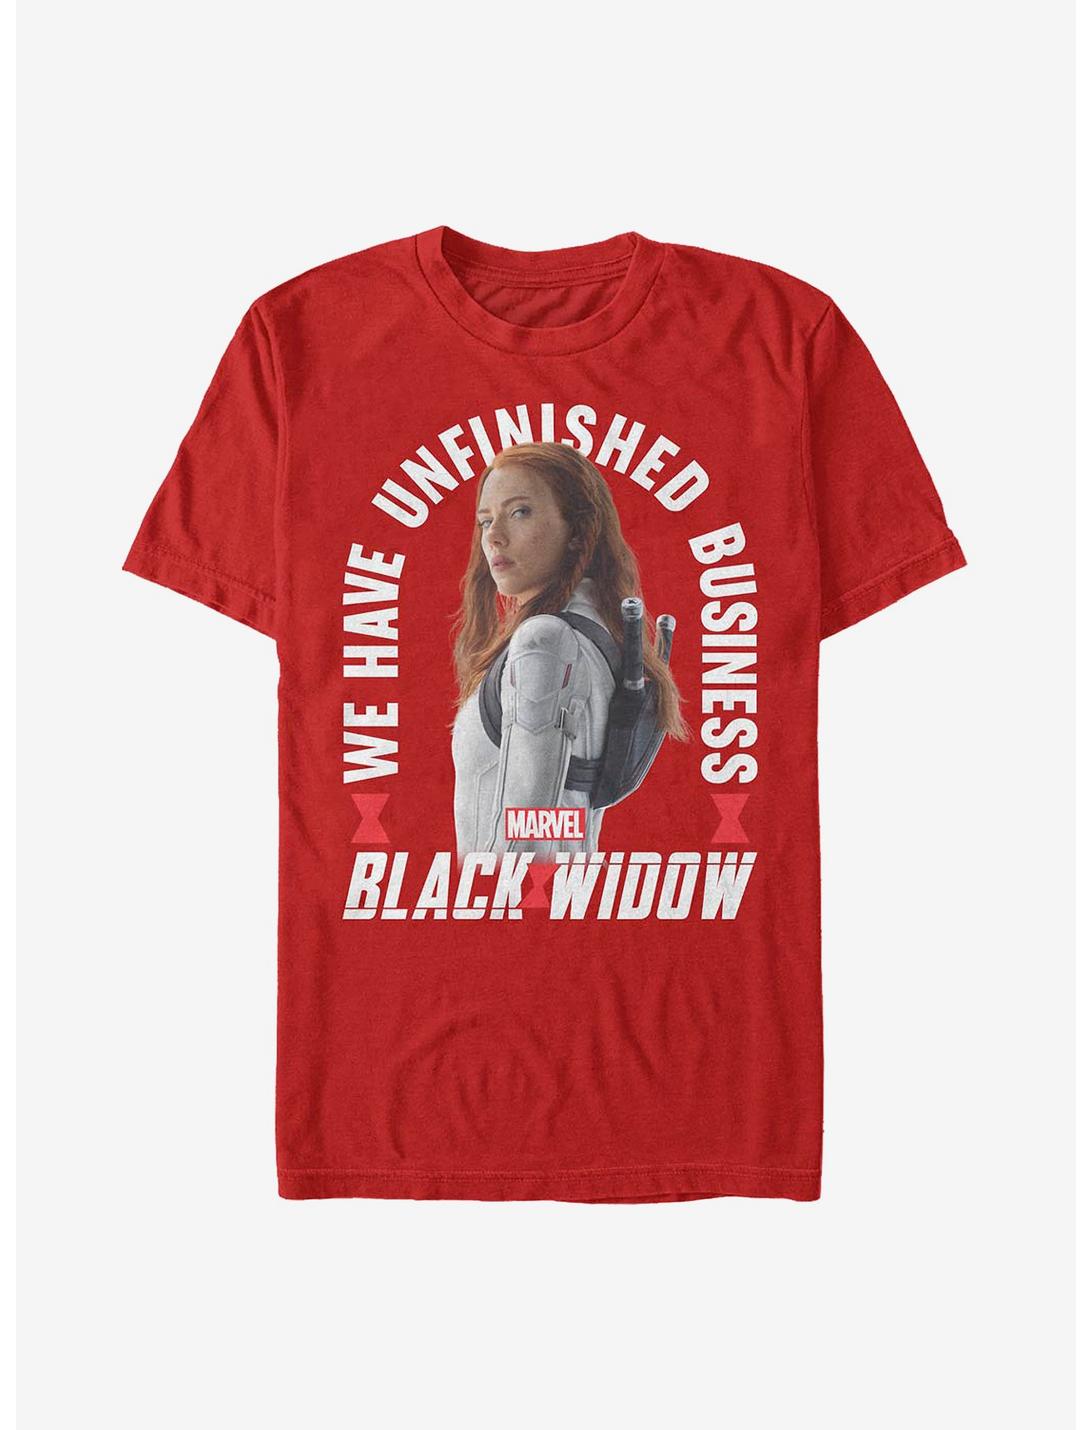 Marvel Black Widow Unfinished Business T-Shirt, RED, hi-res